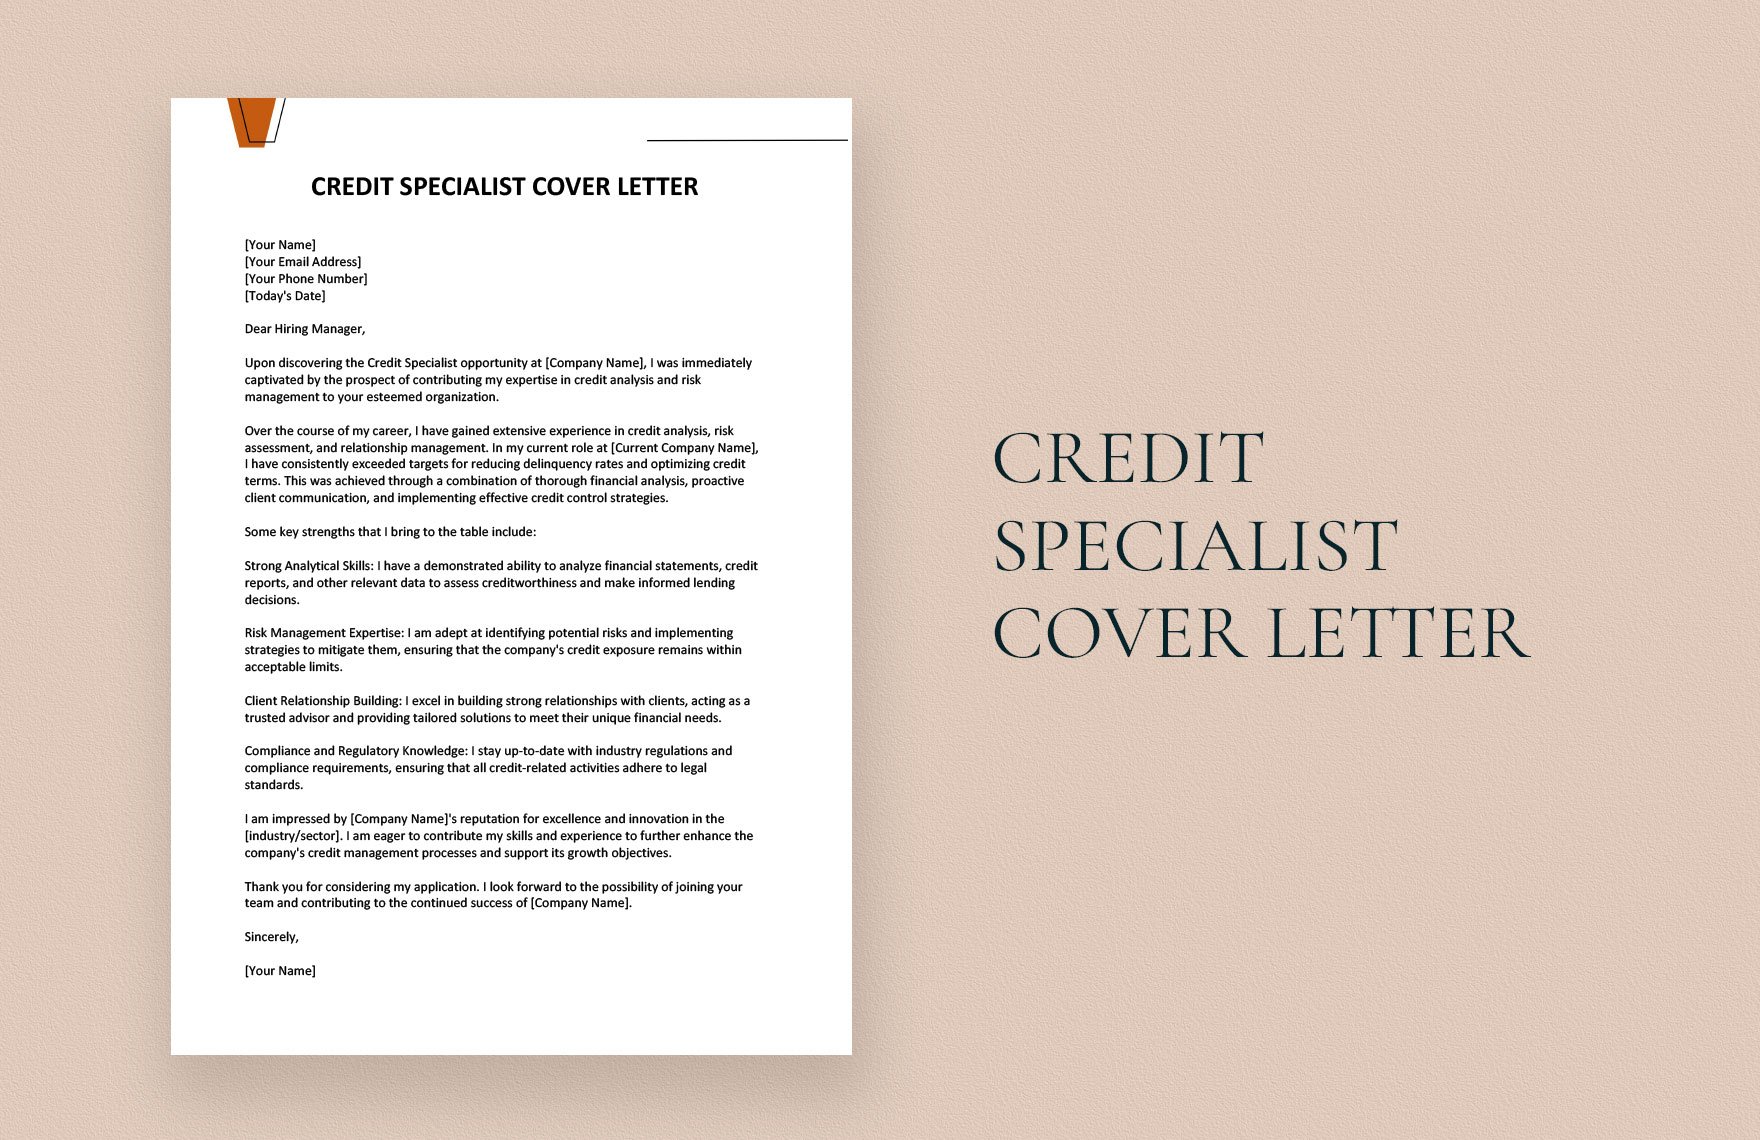 Credit Specialist Cover Letter in Word, Google Docs